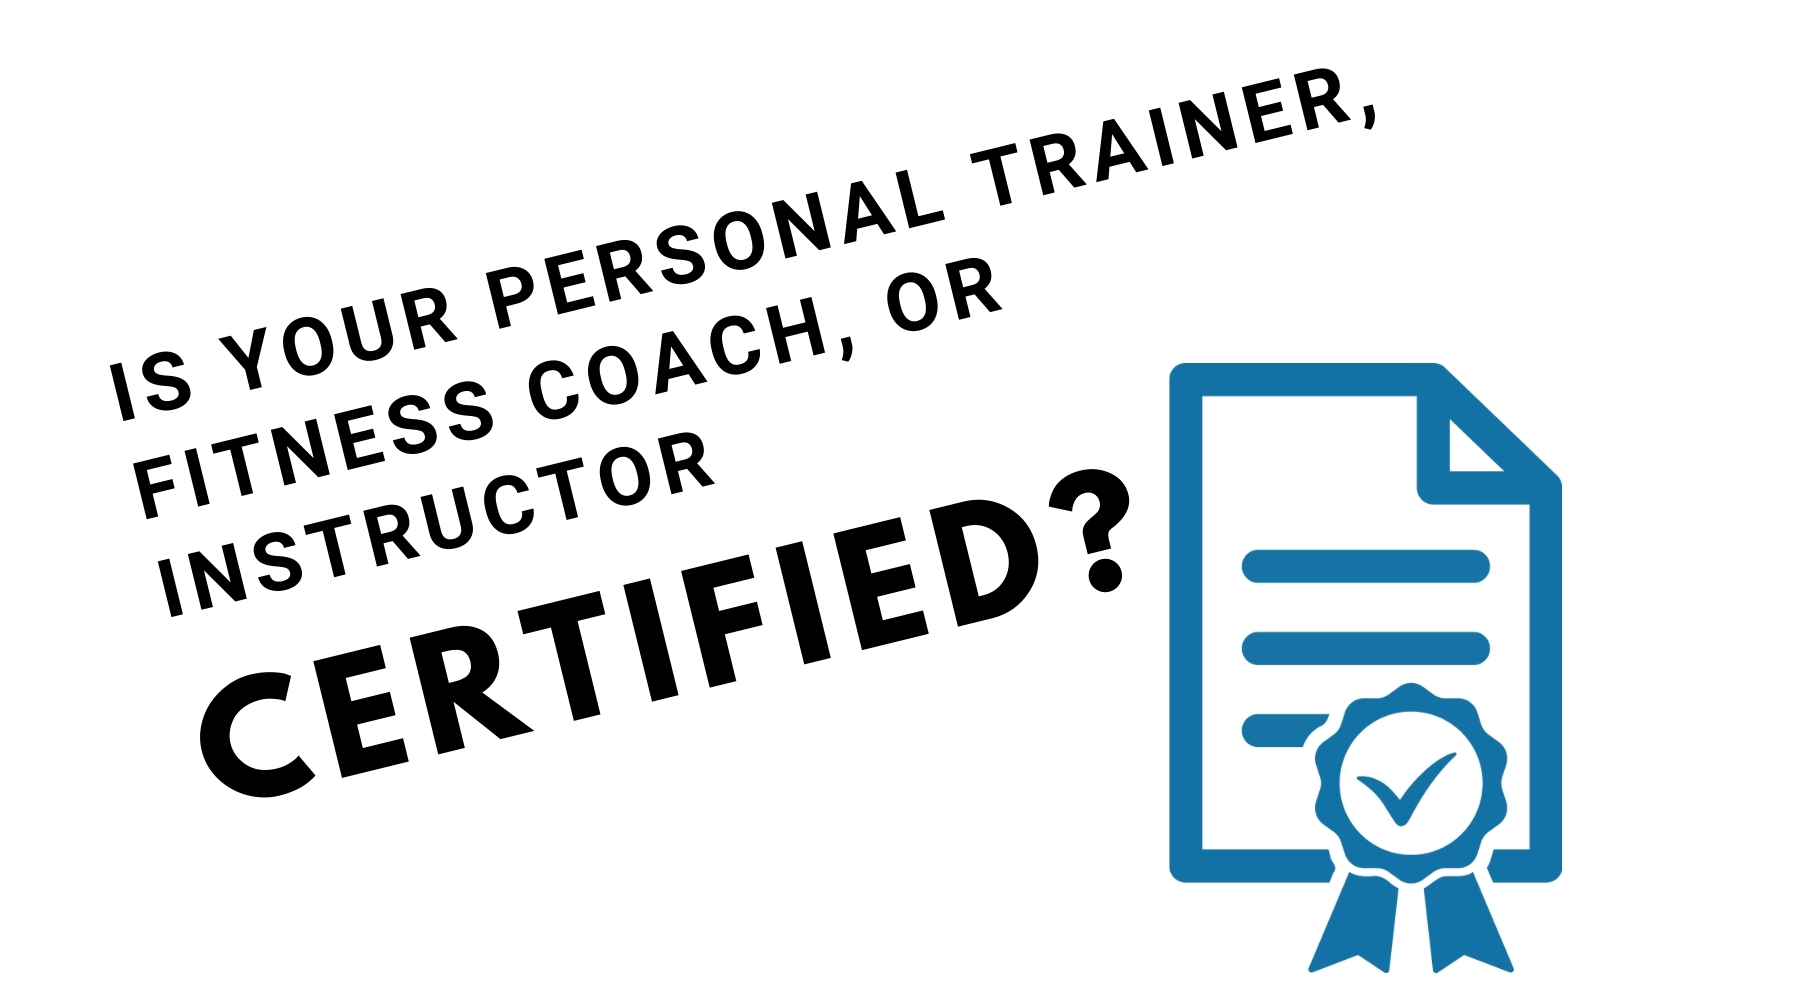 Two ways to verify if your exercise professional is certified.